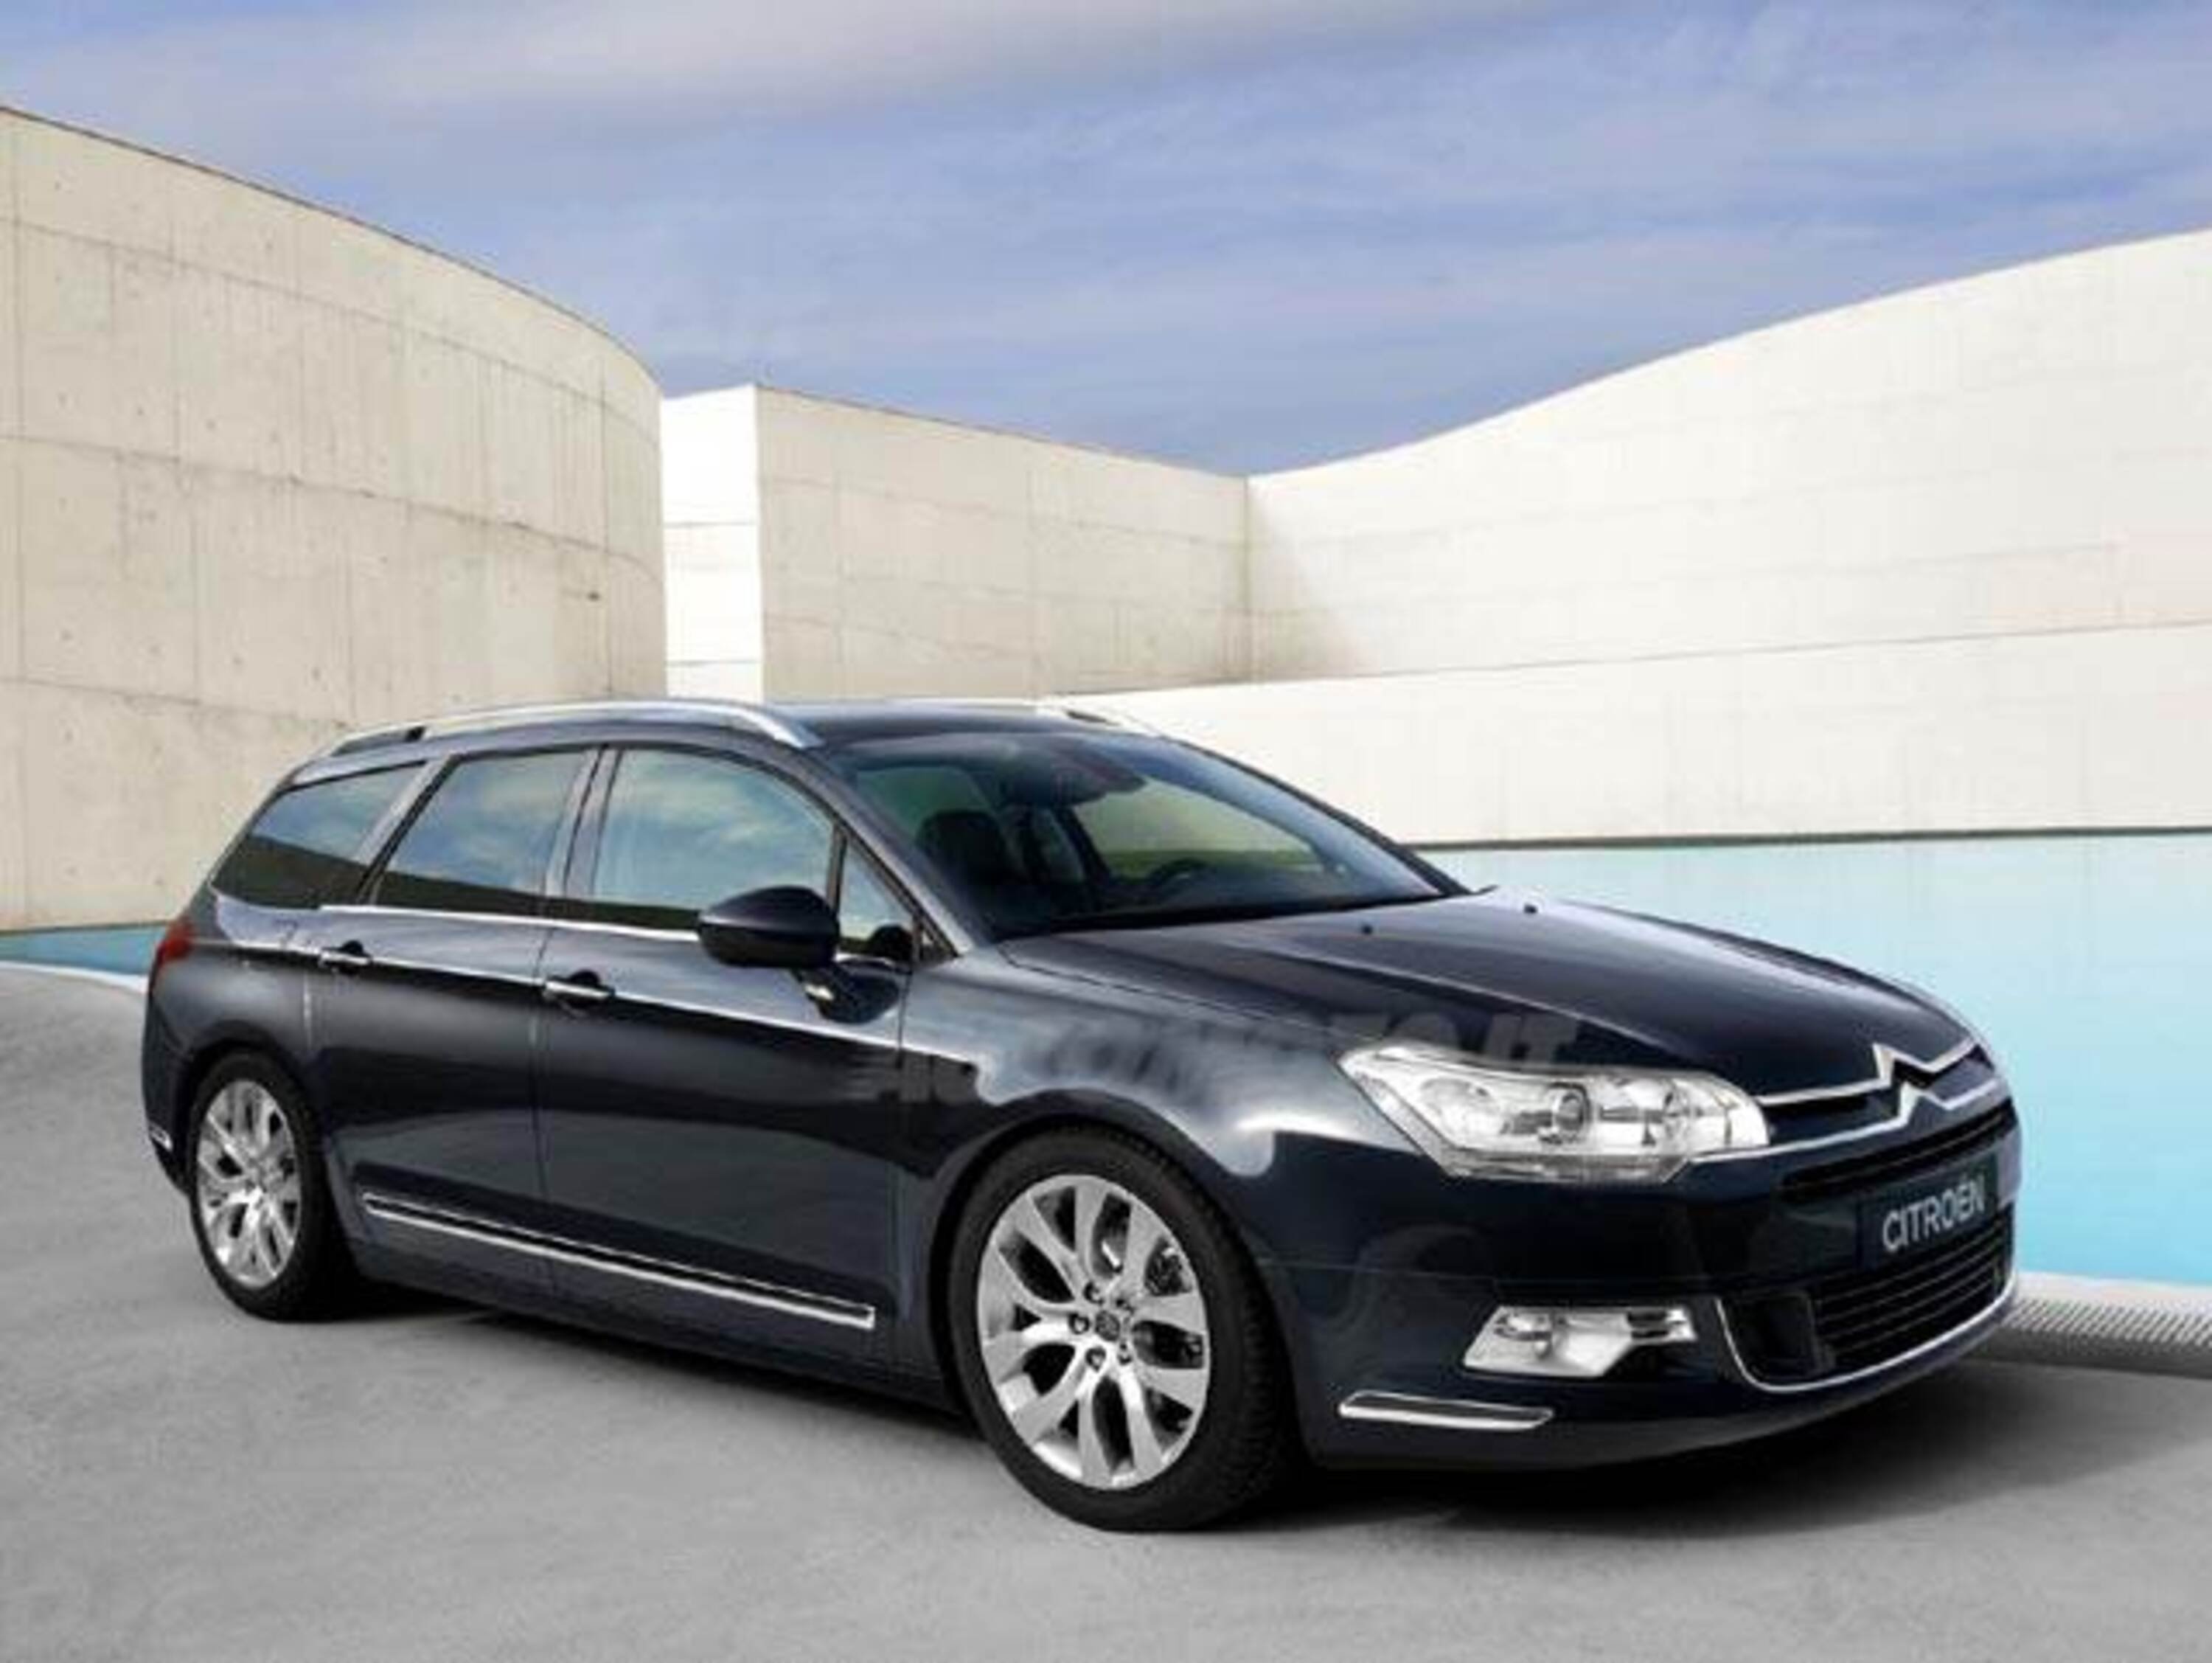 Citroen C5 Station Wagon 1.6 THP 159 Exclusive Style